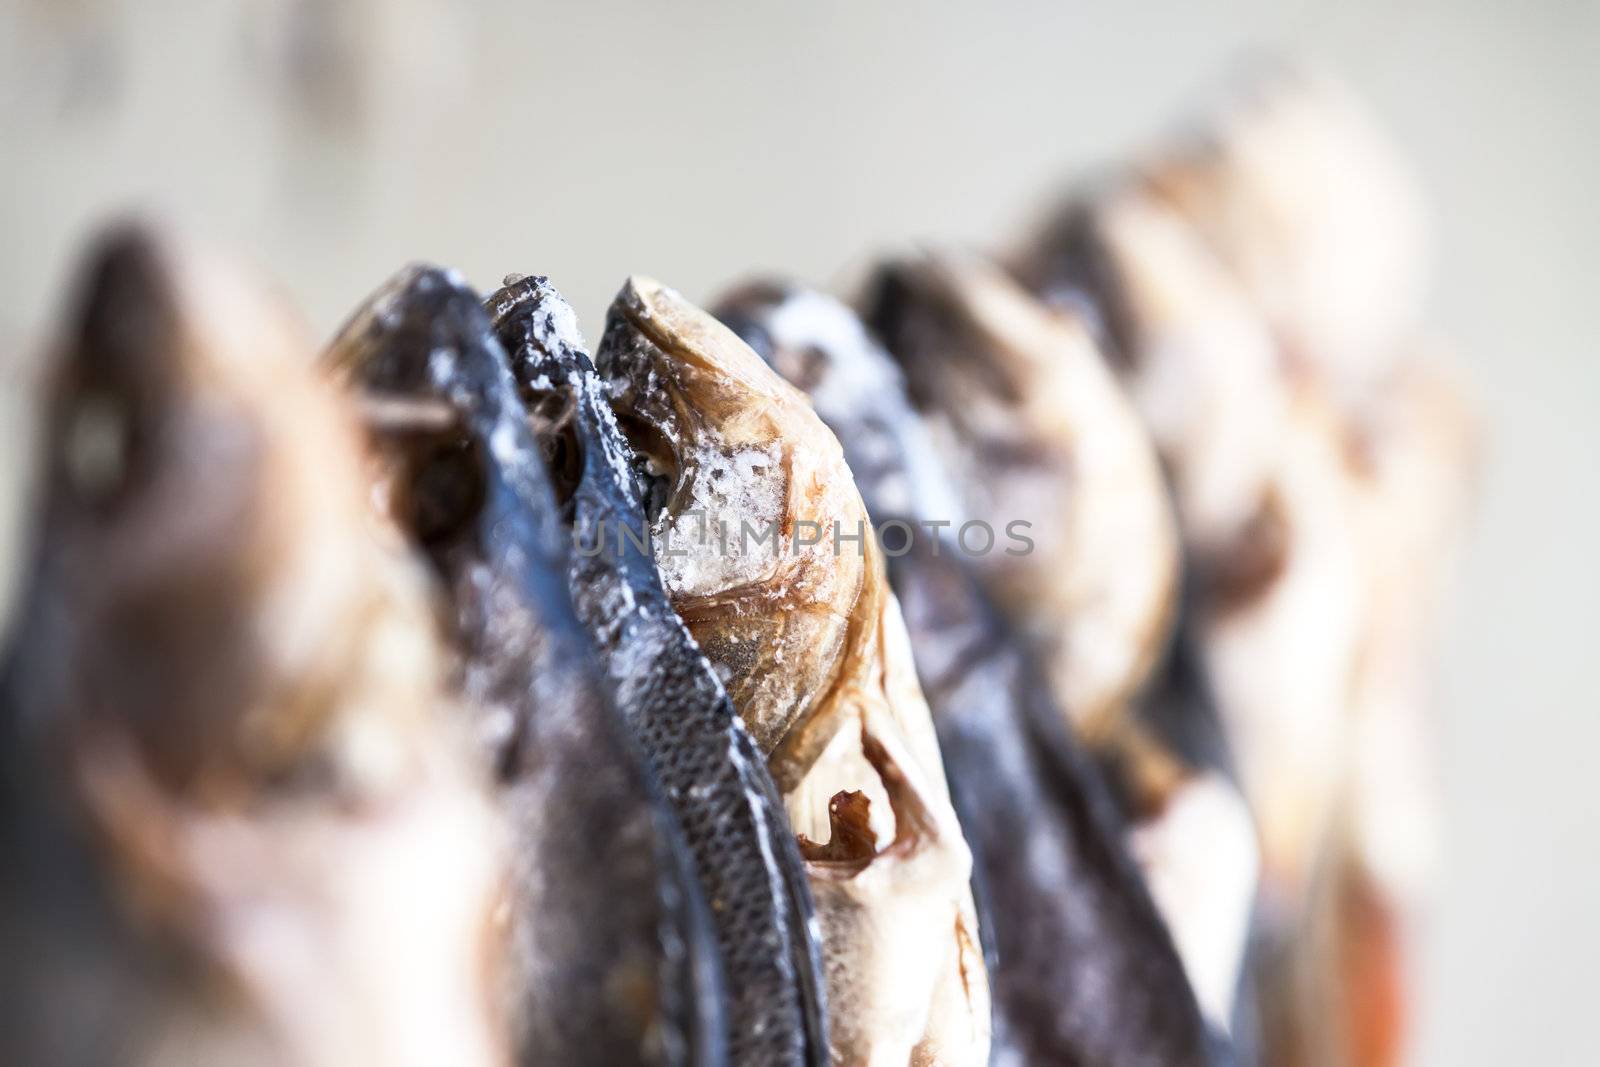 Salted dried river fish for sale. For beer. Russia